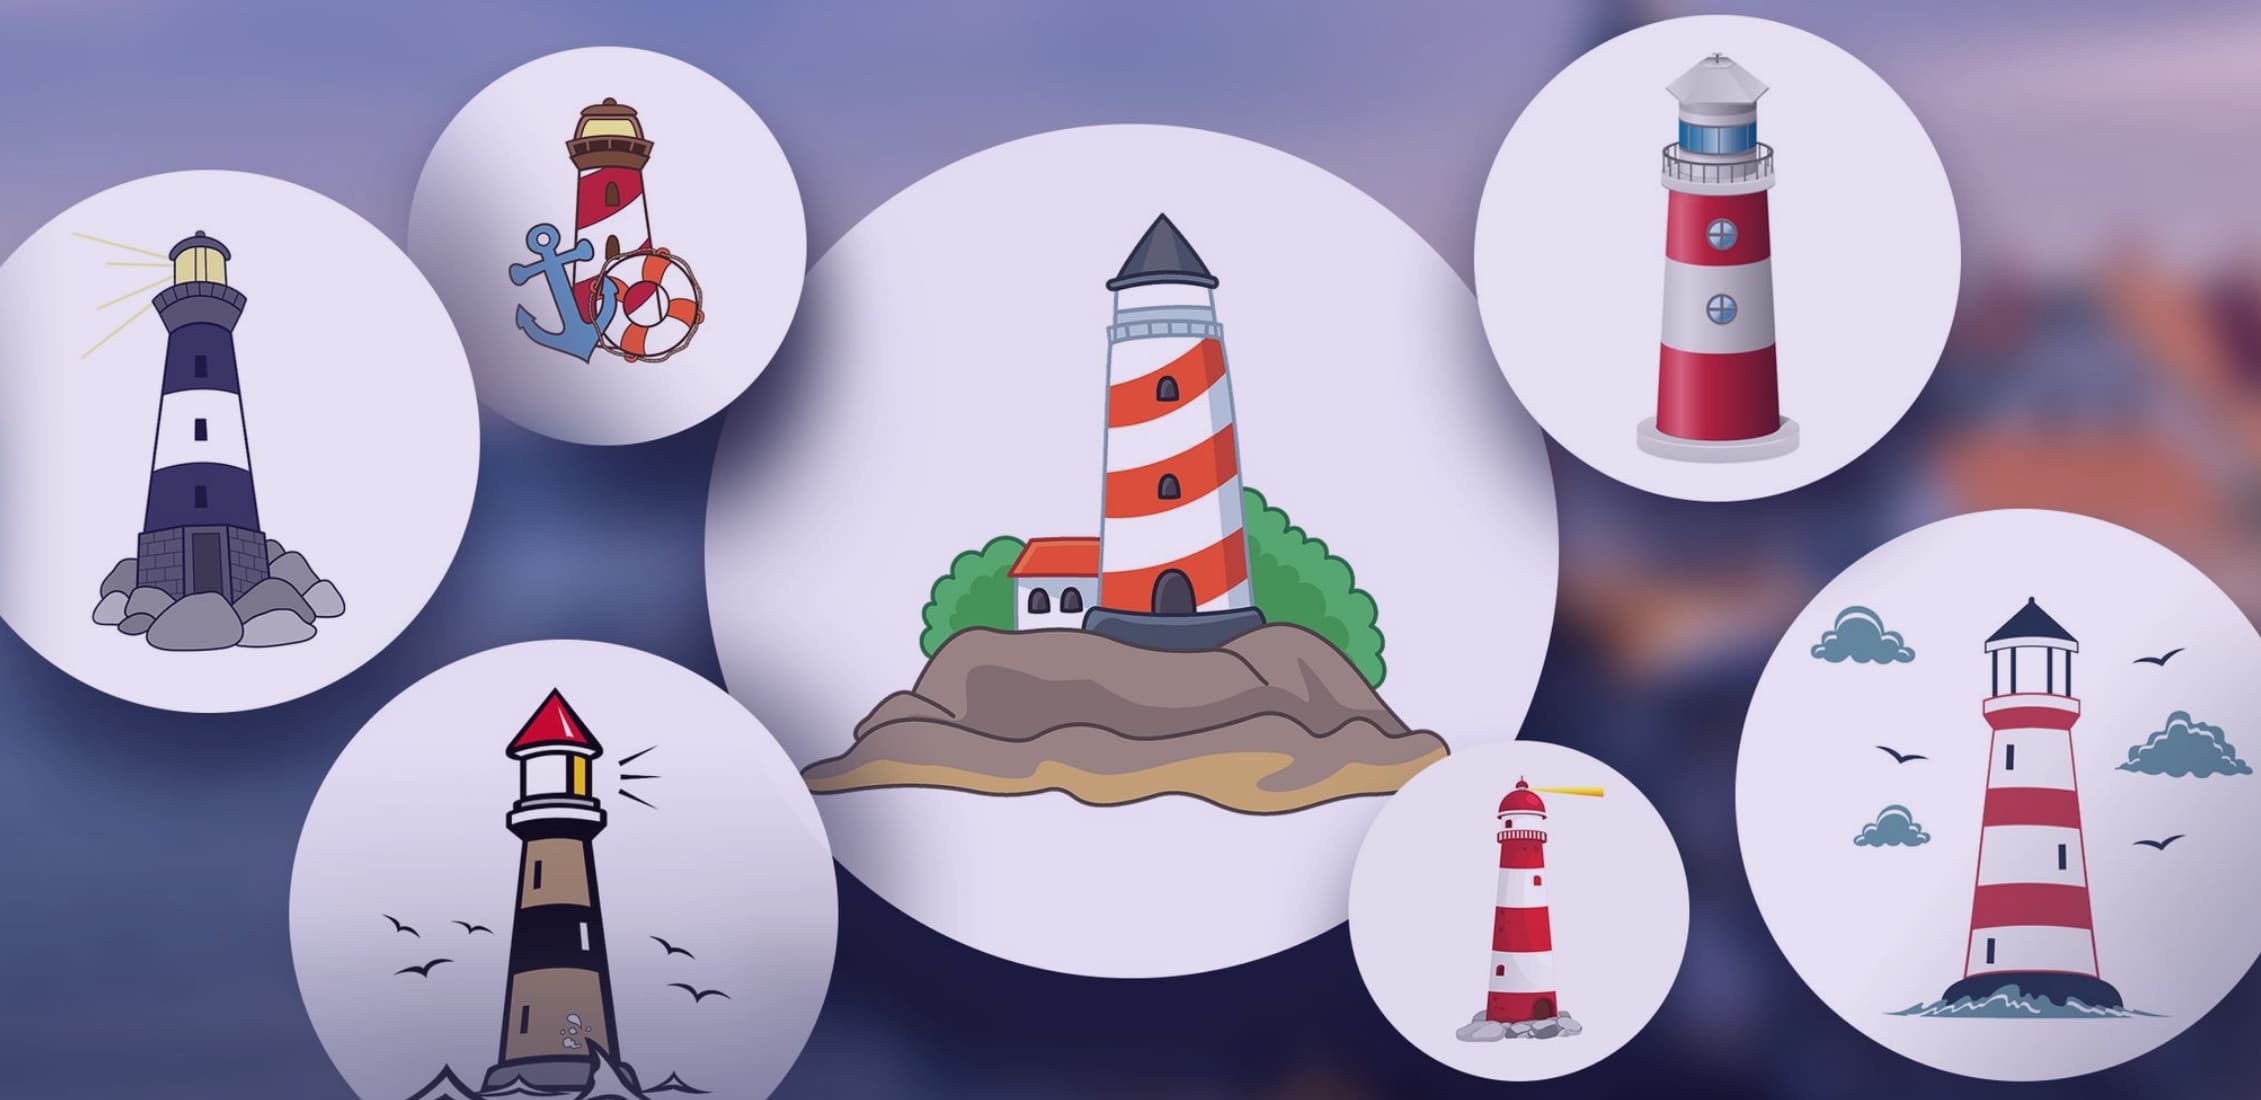 Examples of different painted lighthouses. Lighthouses are located in white circles.